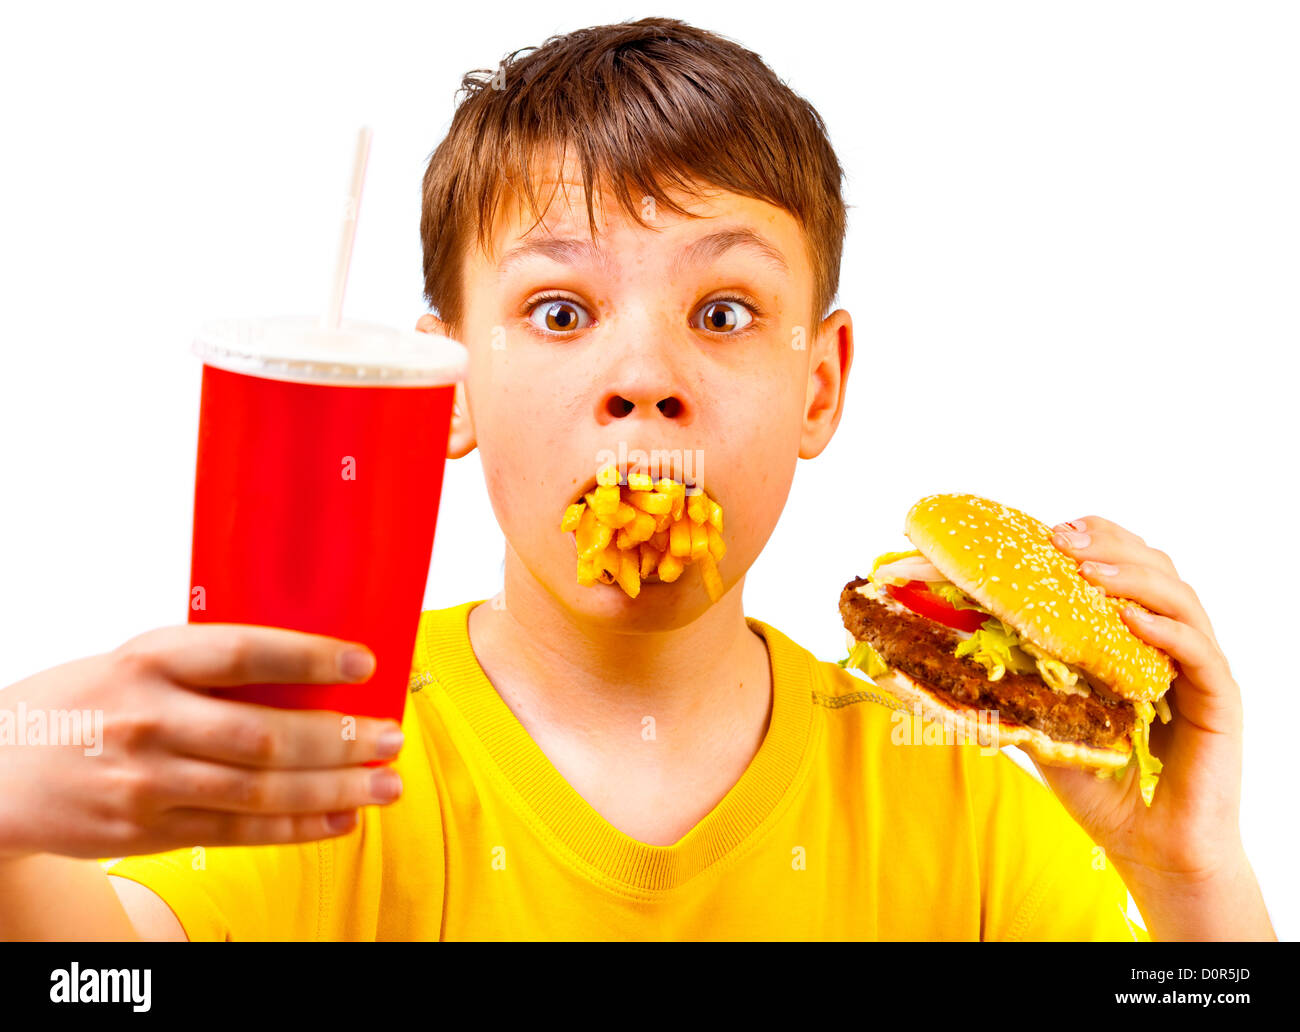 child and fast food Stock Photo